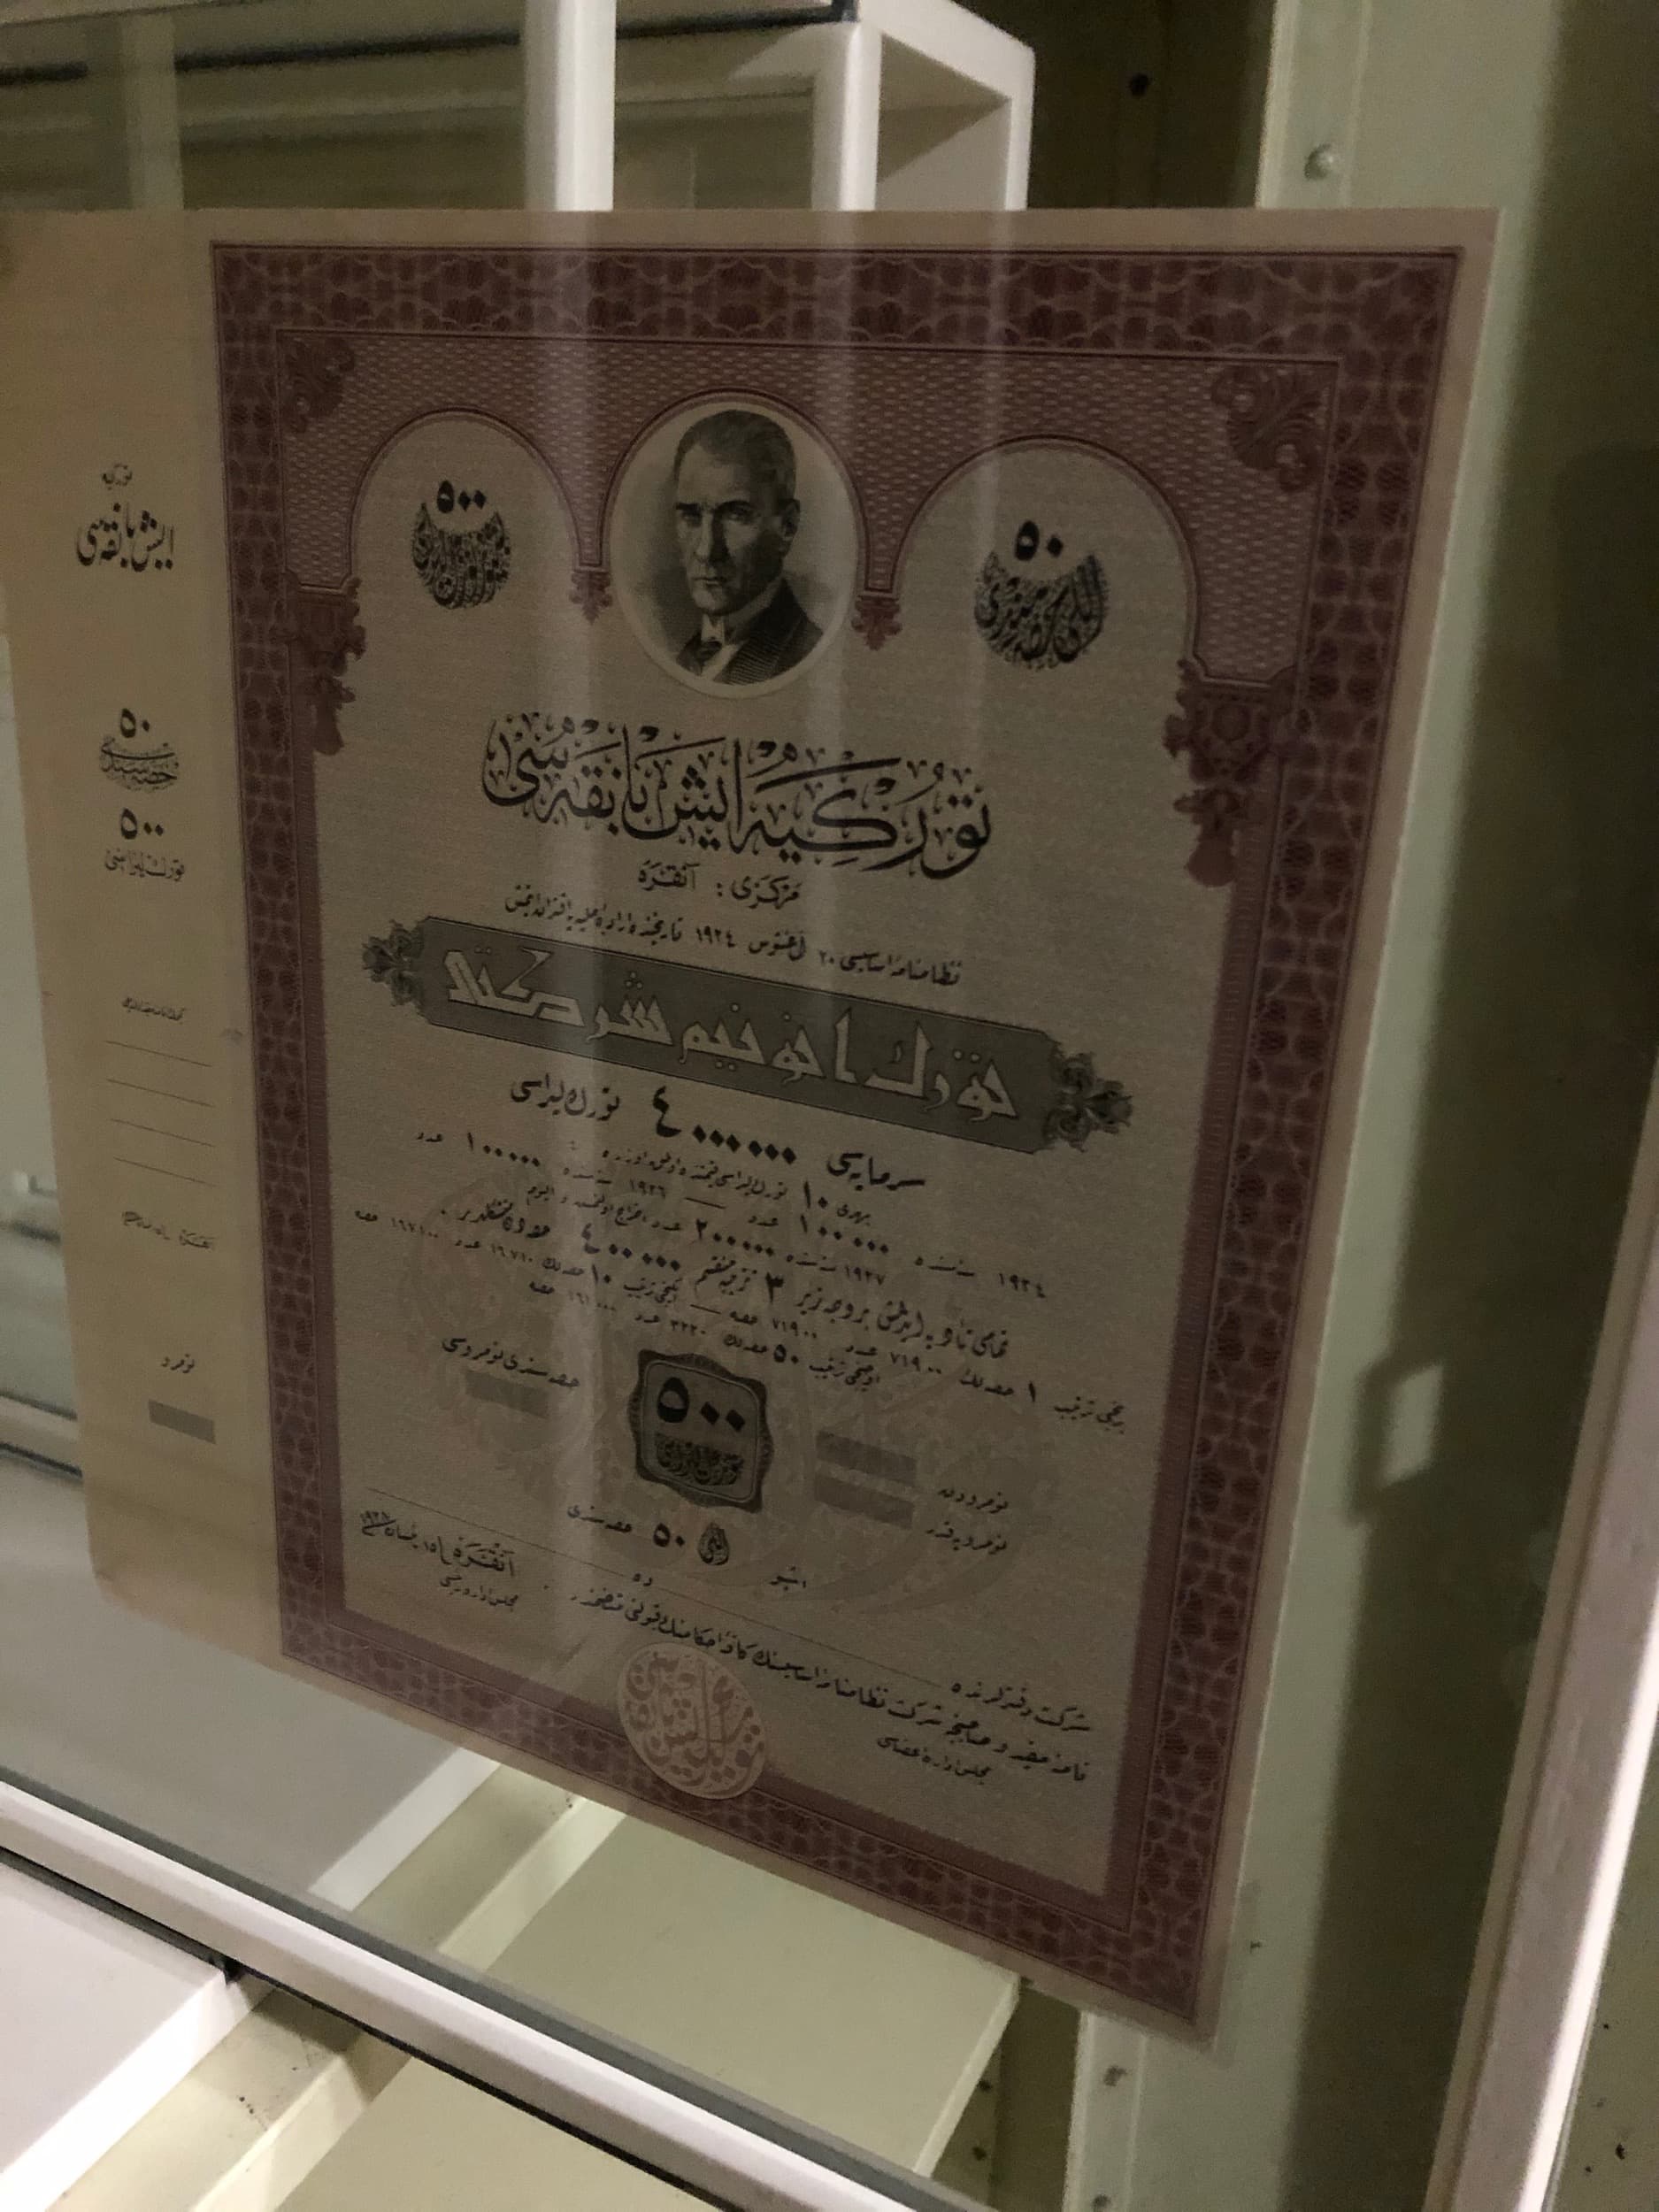 Stock shares in Ottoman Turkish at the İşbank Museum